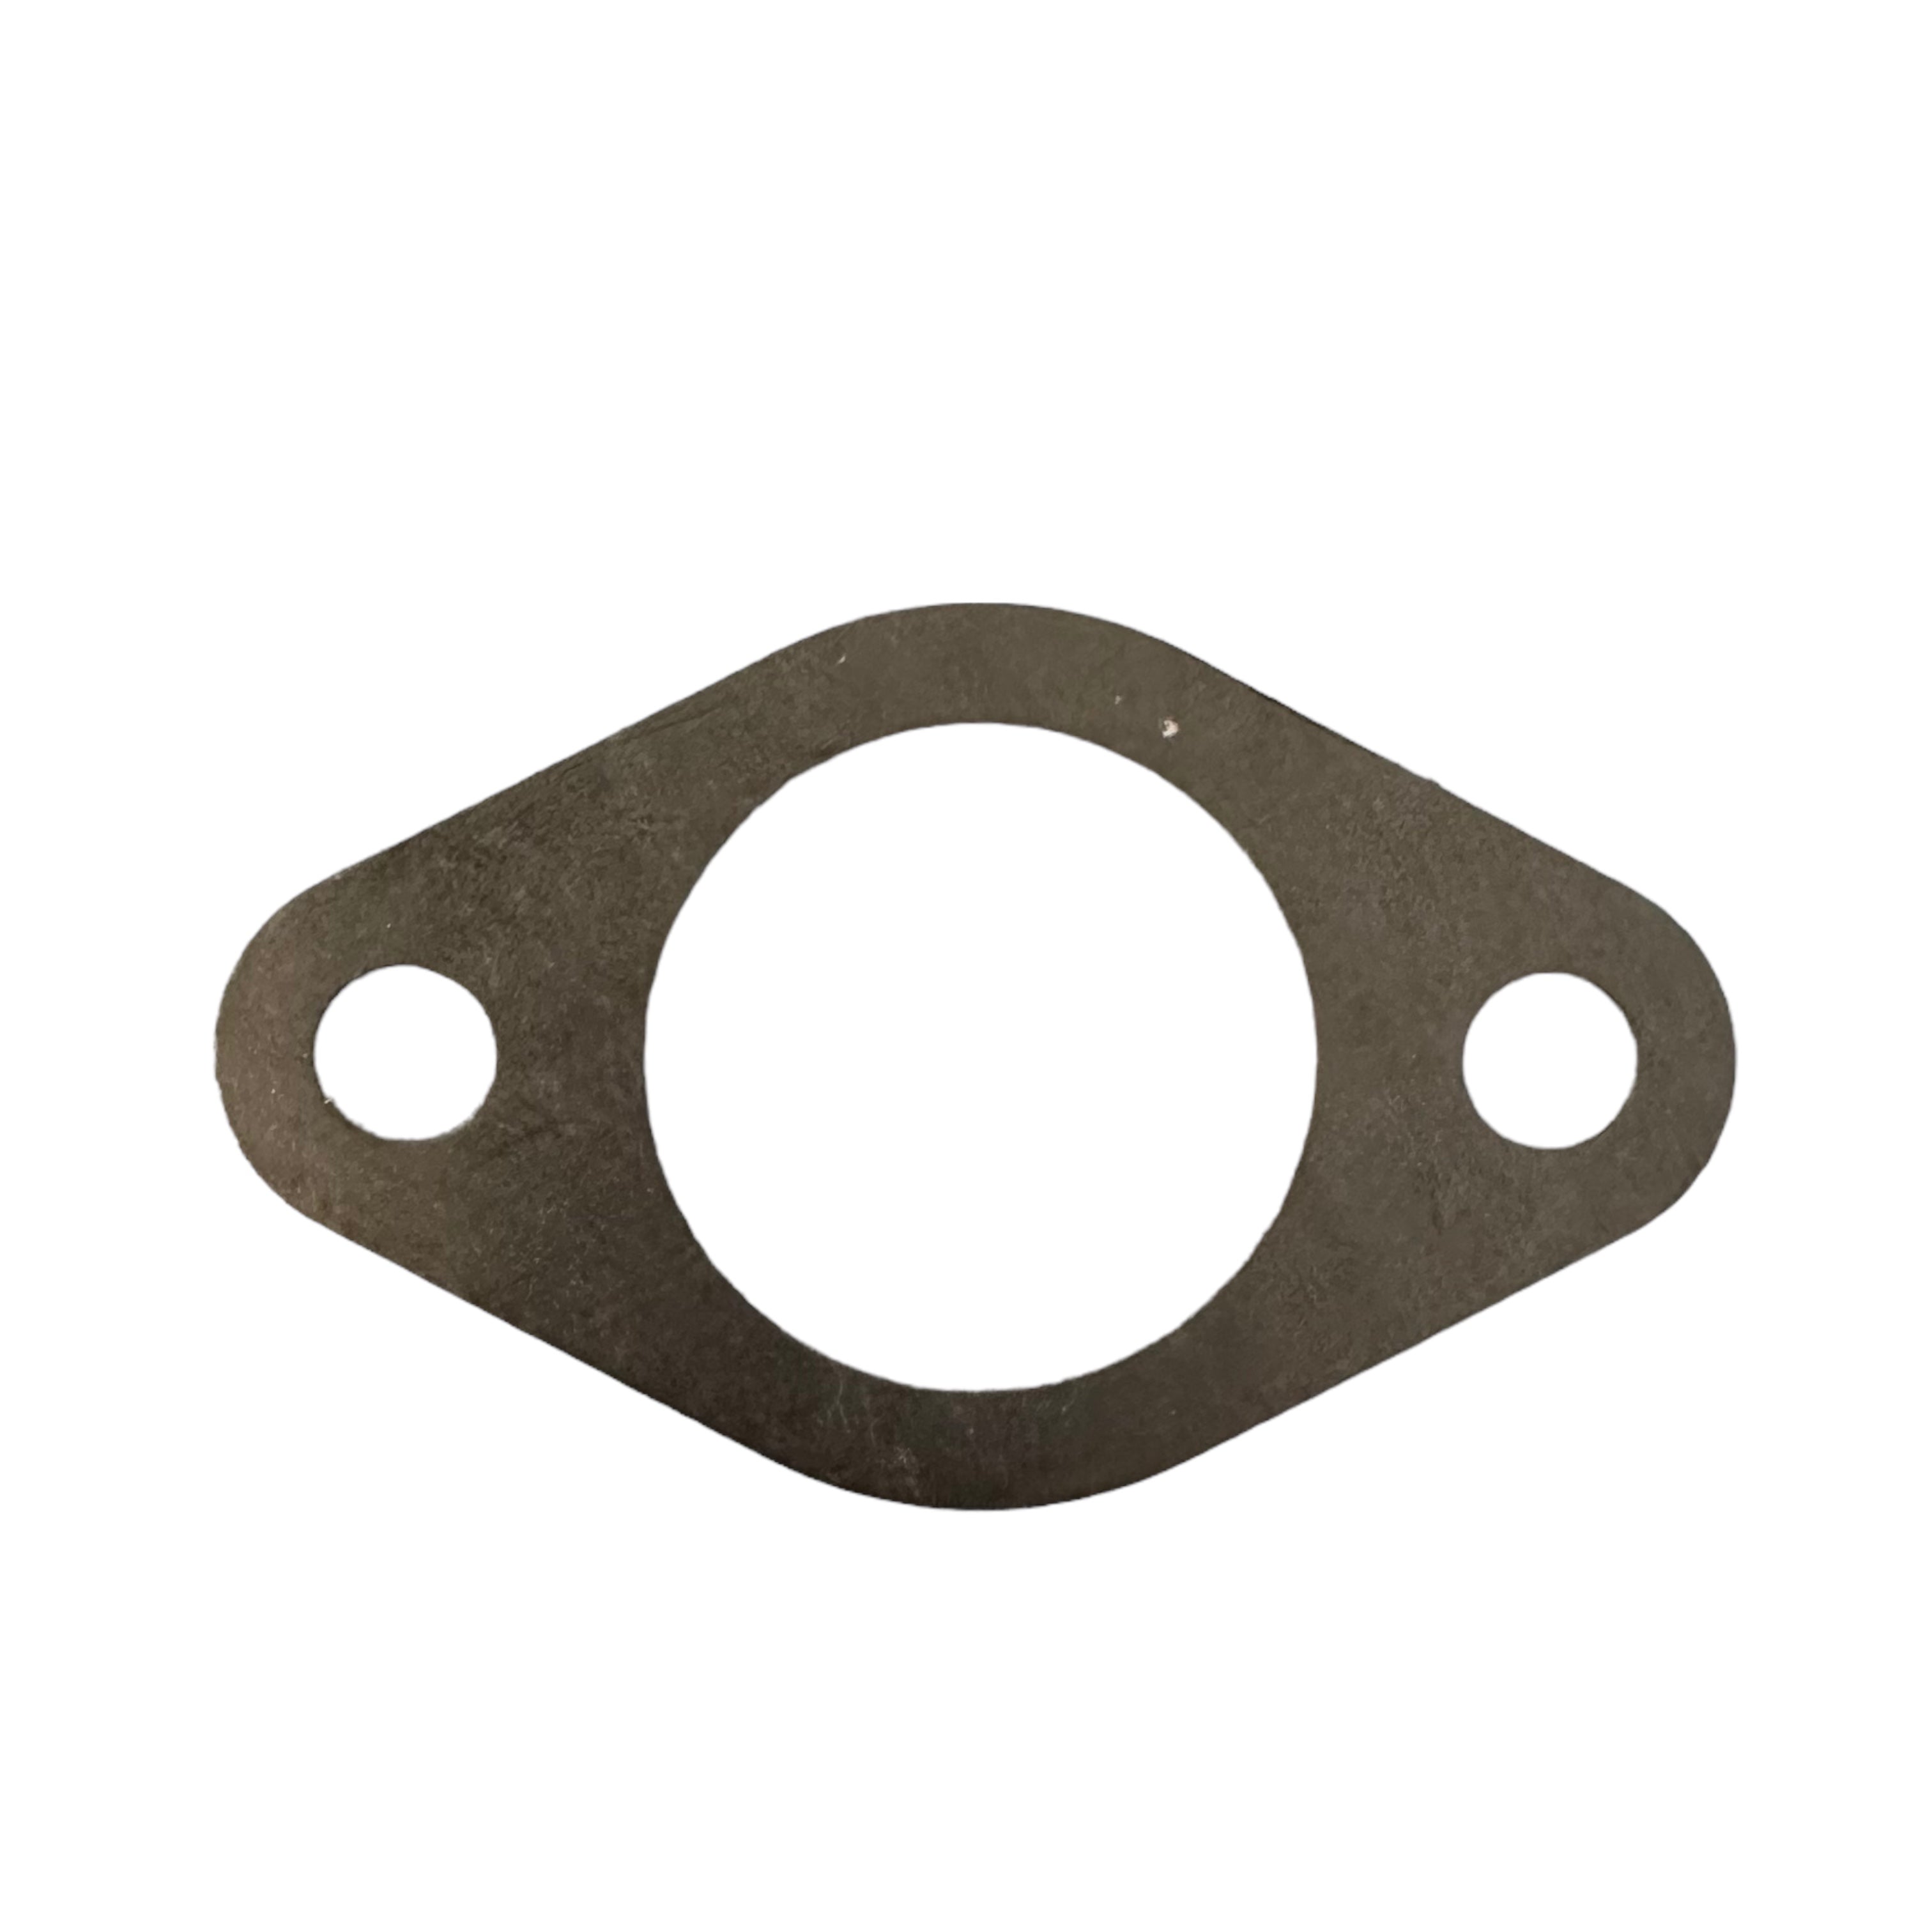 Exhaust gasket for Tomos Atx and Bt50